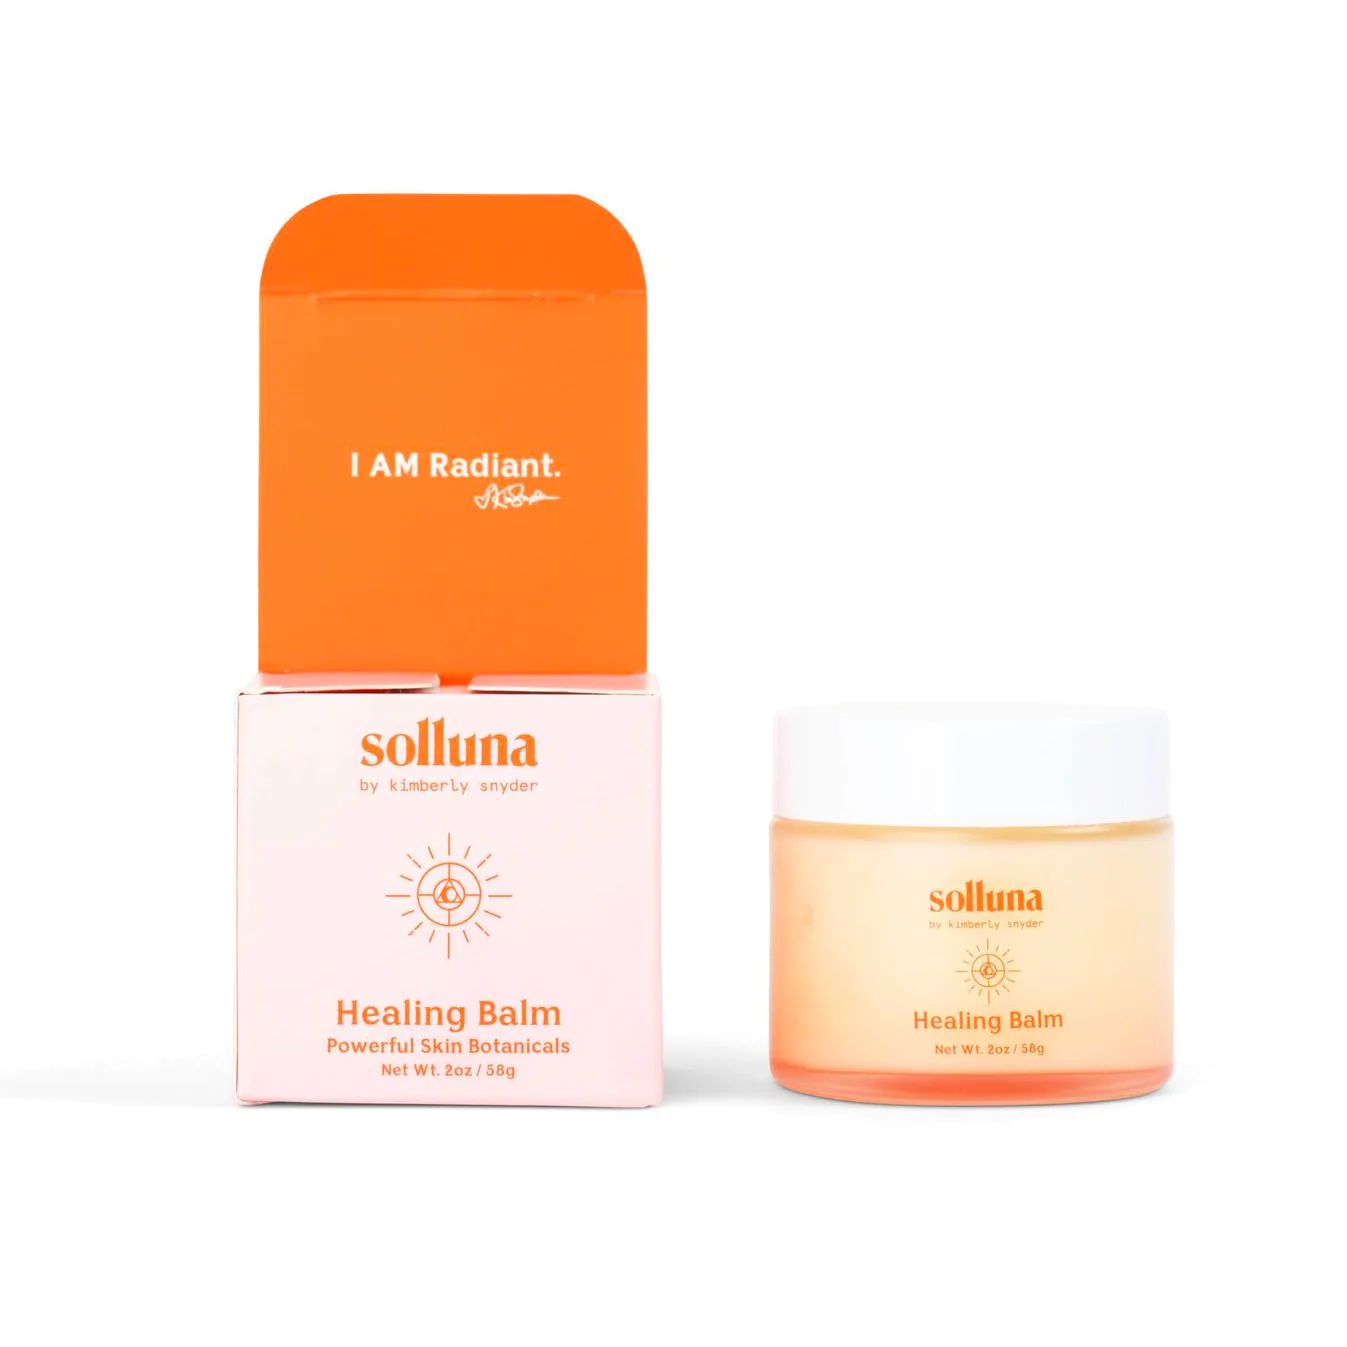 healing balm solluna by kimberly snyder